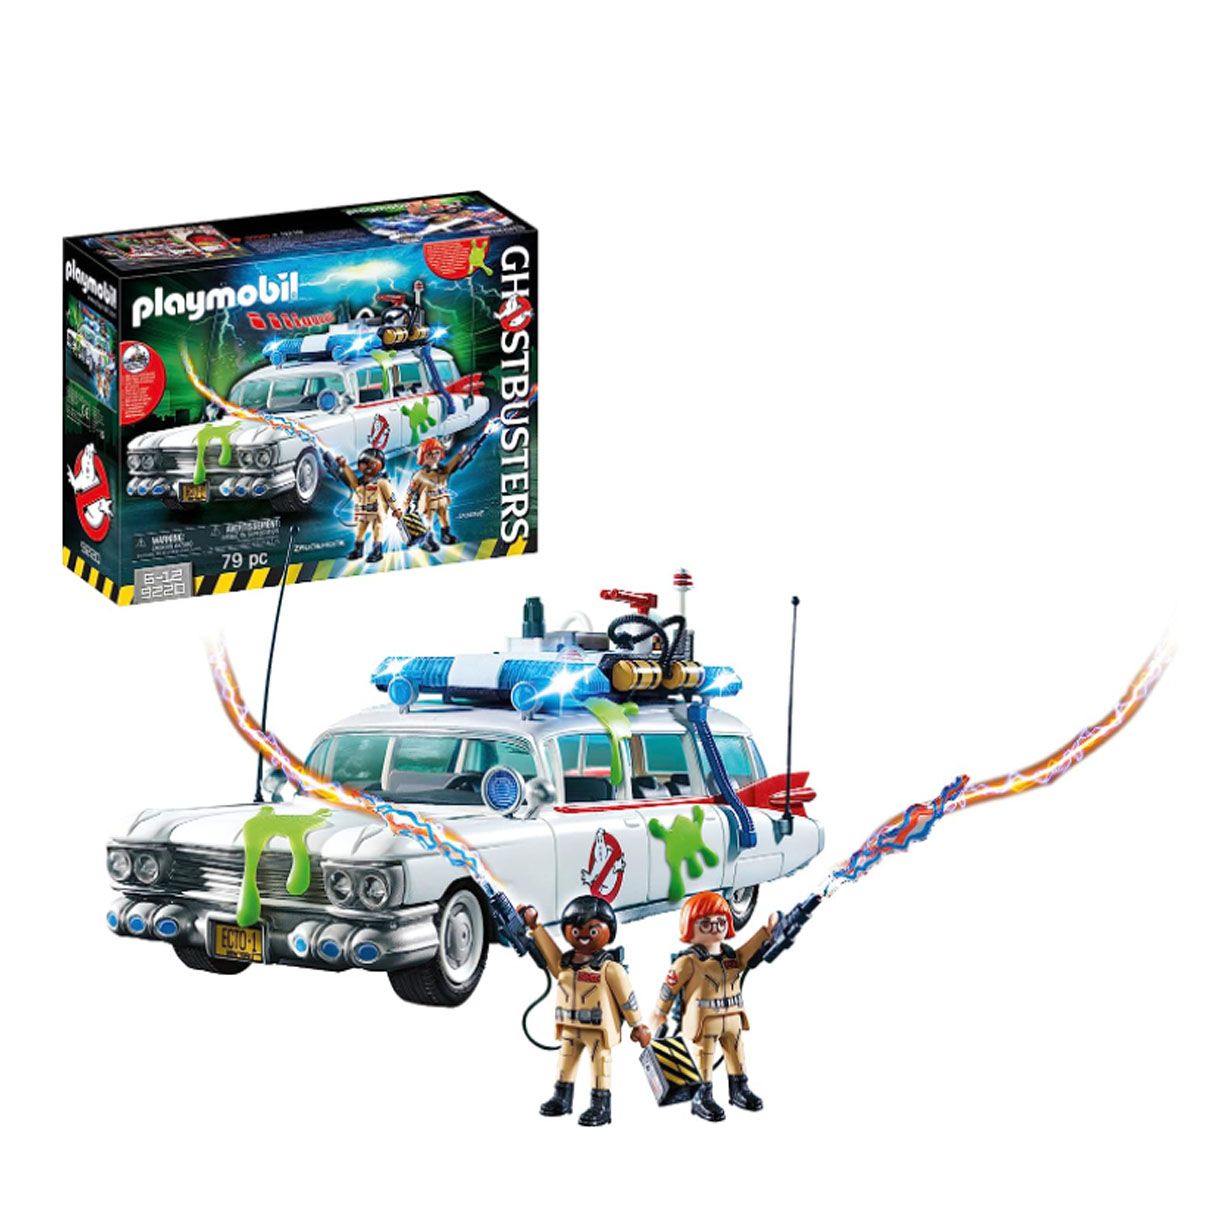 playmobil ecto-1 ghostbusters (9220)